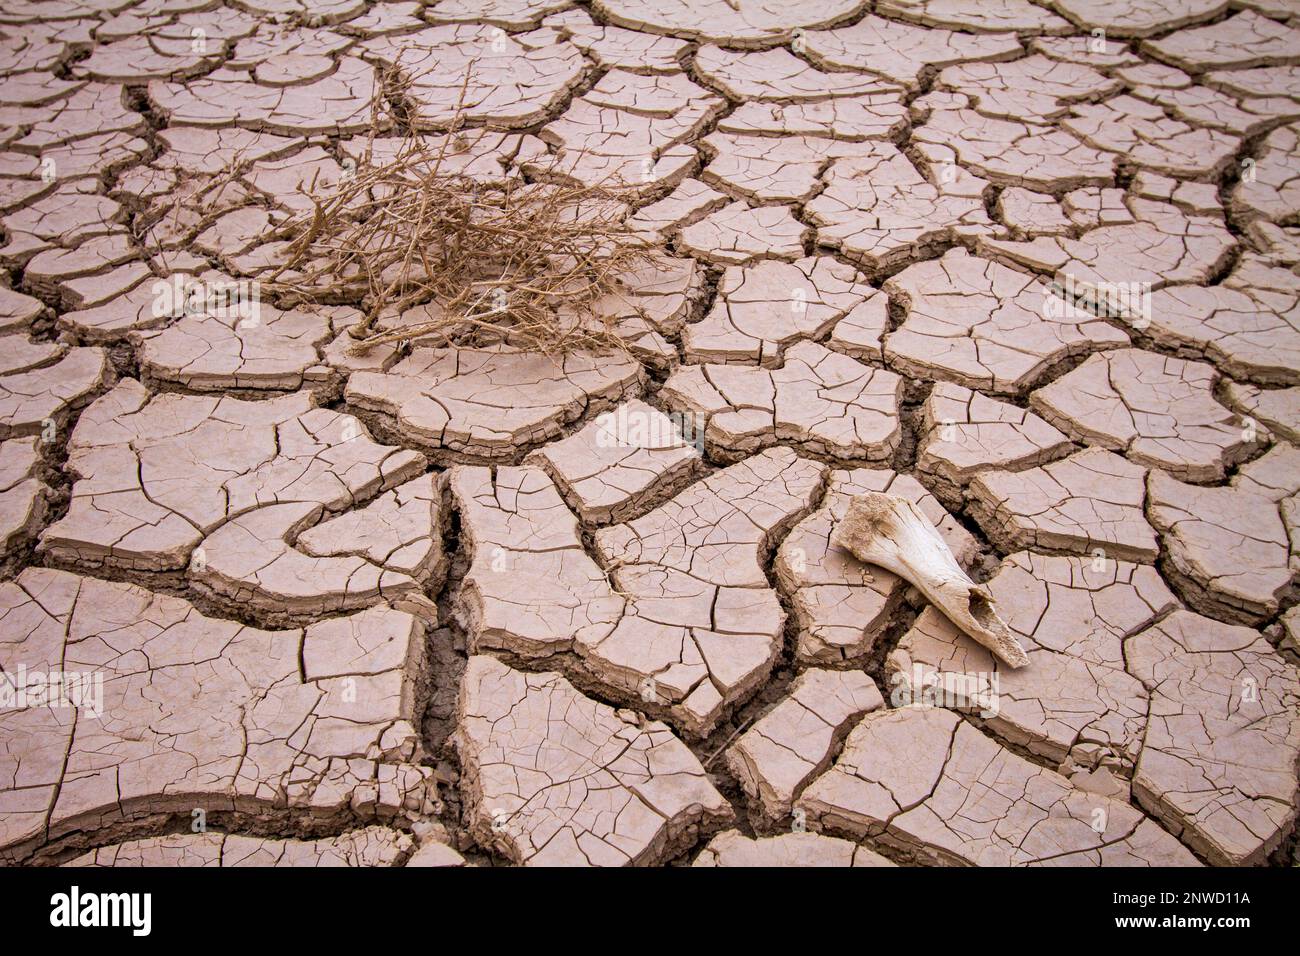 Persistent drought and diminishing inflows from the Colorado River have devastated many parts of Imperial Valley in southeastern California. Stock Photo